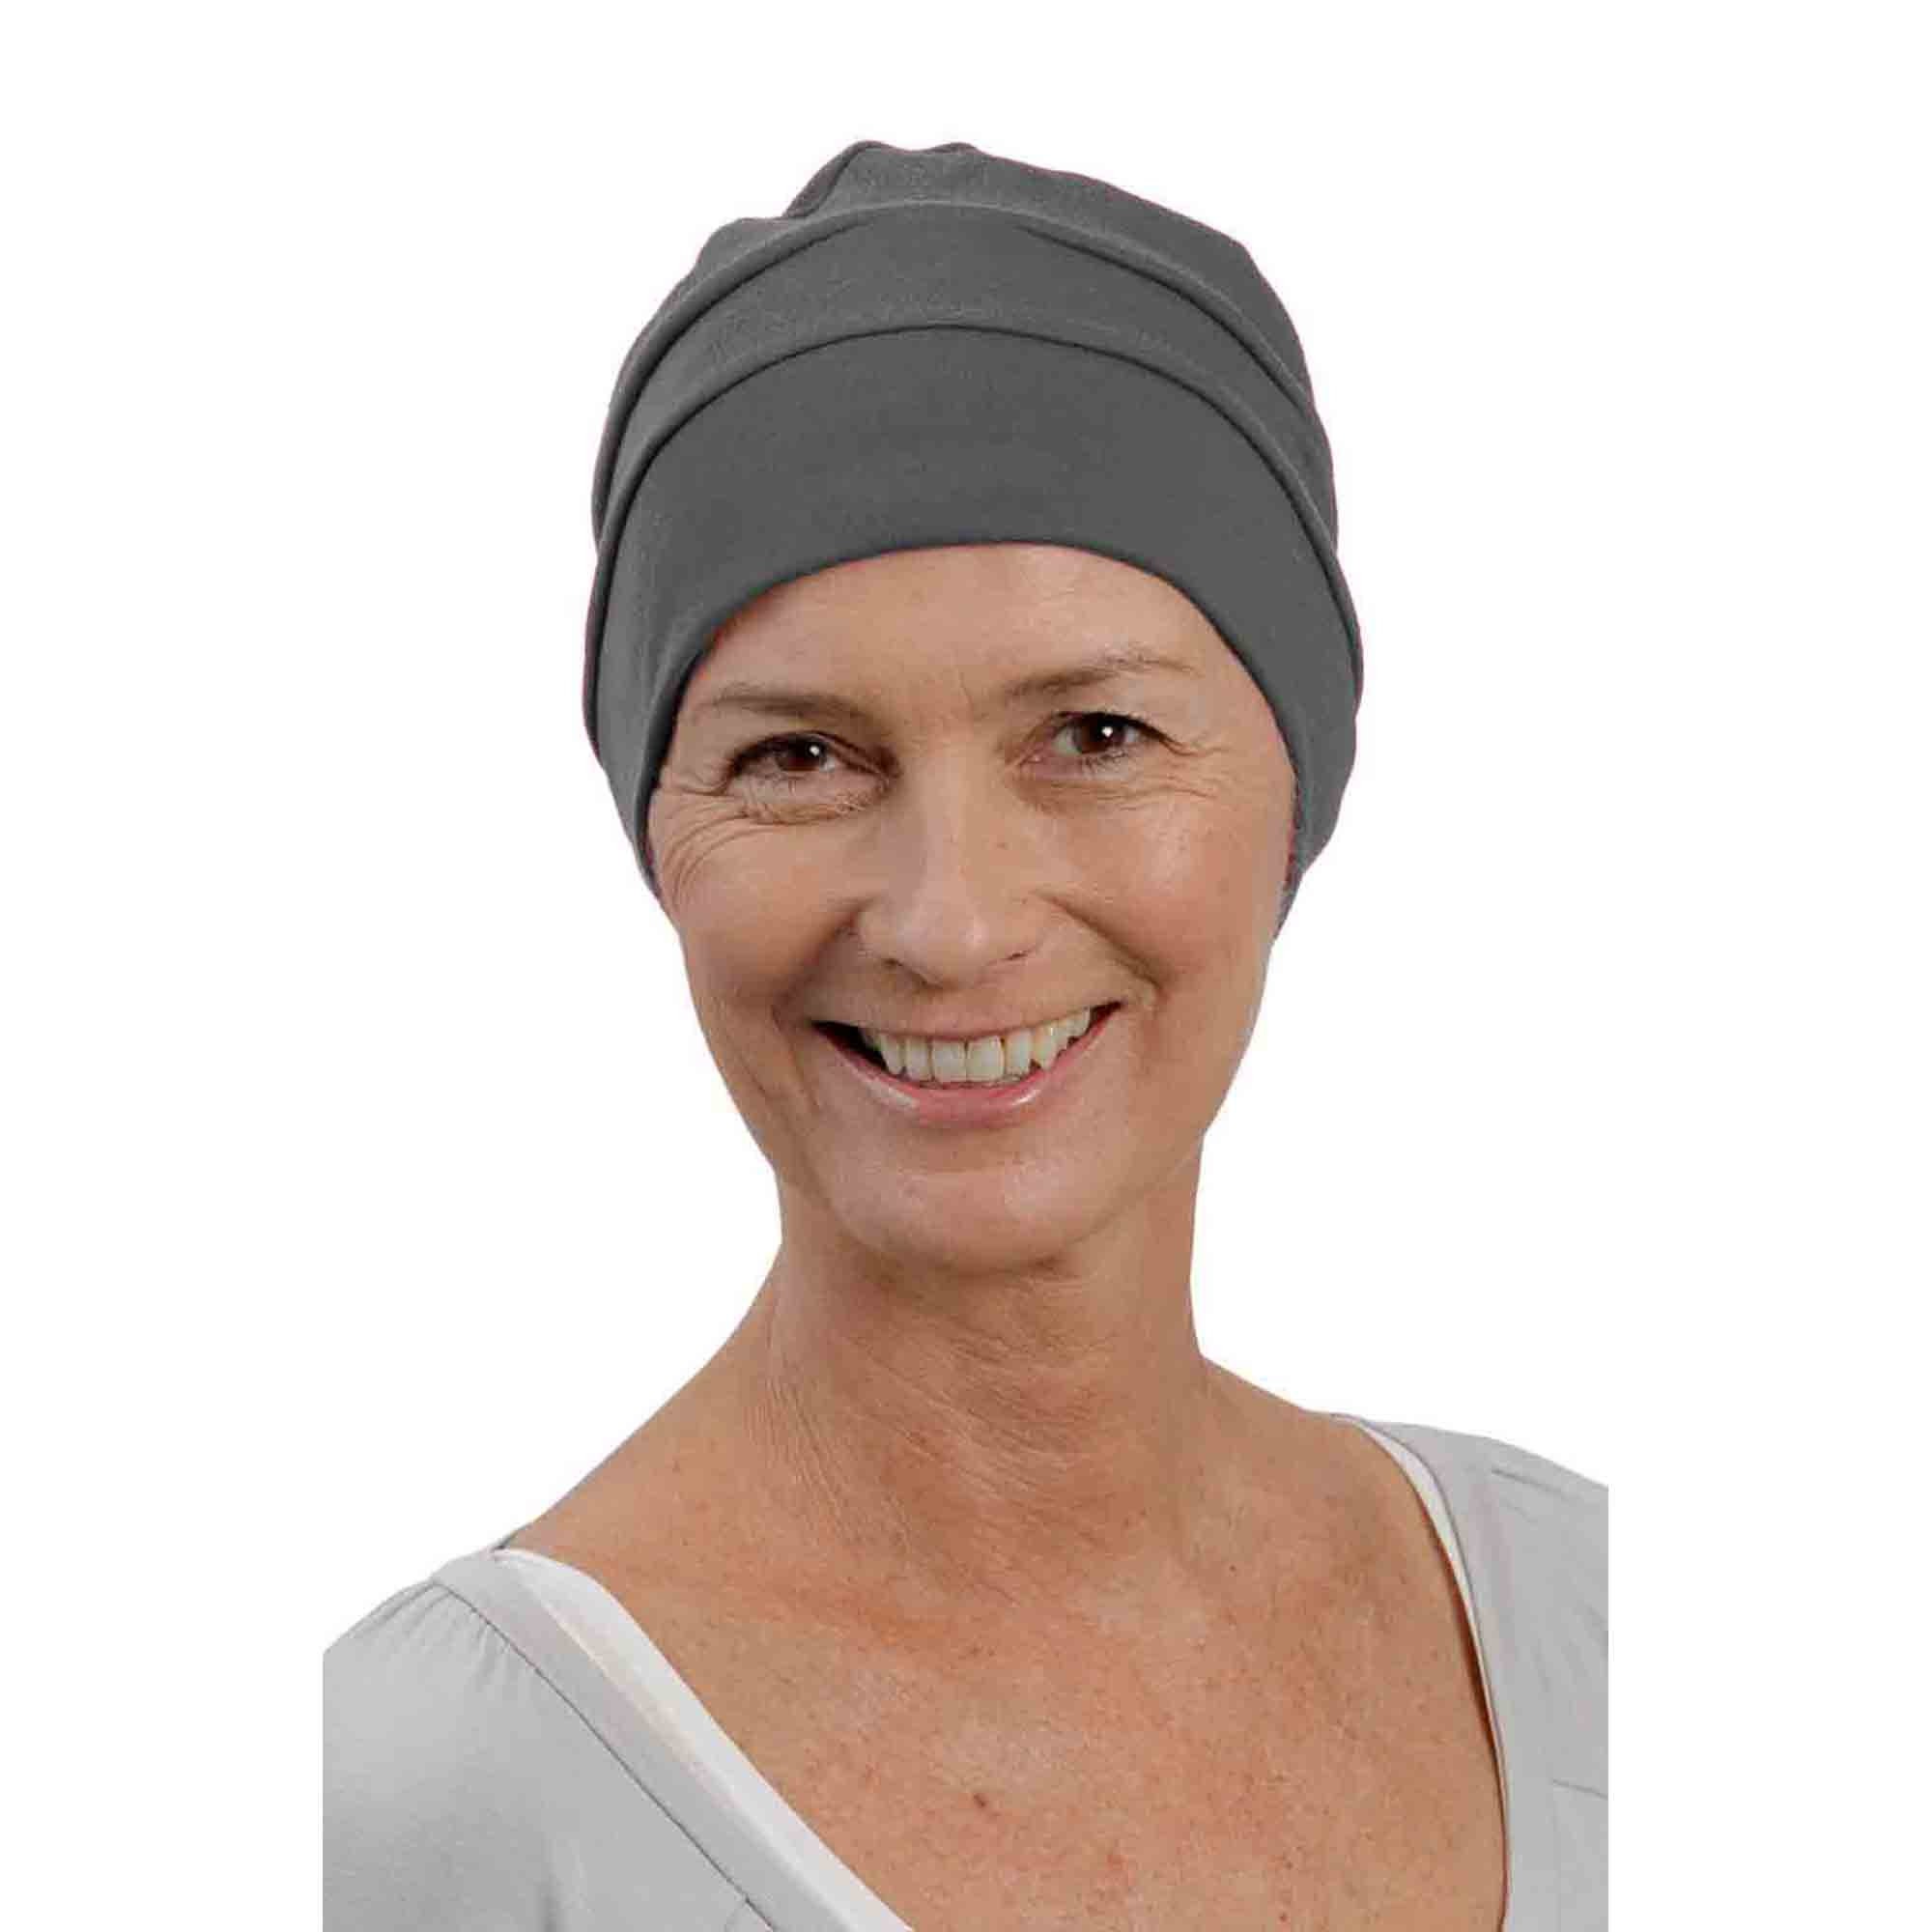 Accessories Hats & Caps Slouchy Hats Chemo Hat Soft Comfortable Alternative to Wig Headwear Beanie Turban Cotton Cap Easy to Wear Alopecia Hair Loss 